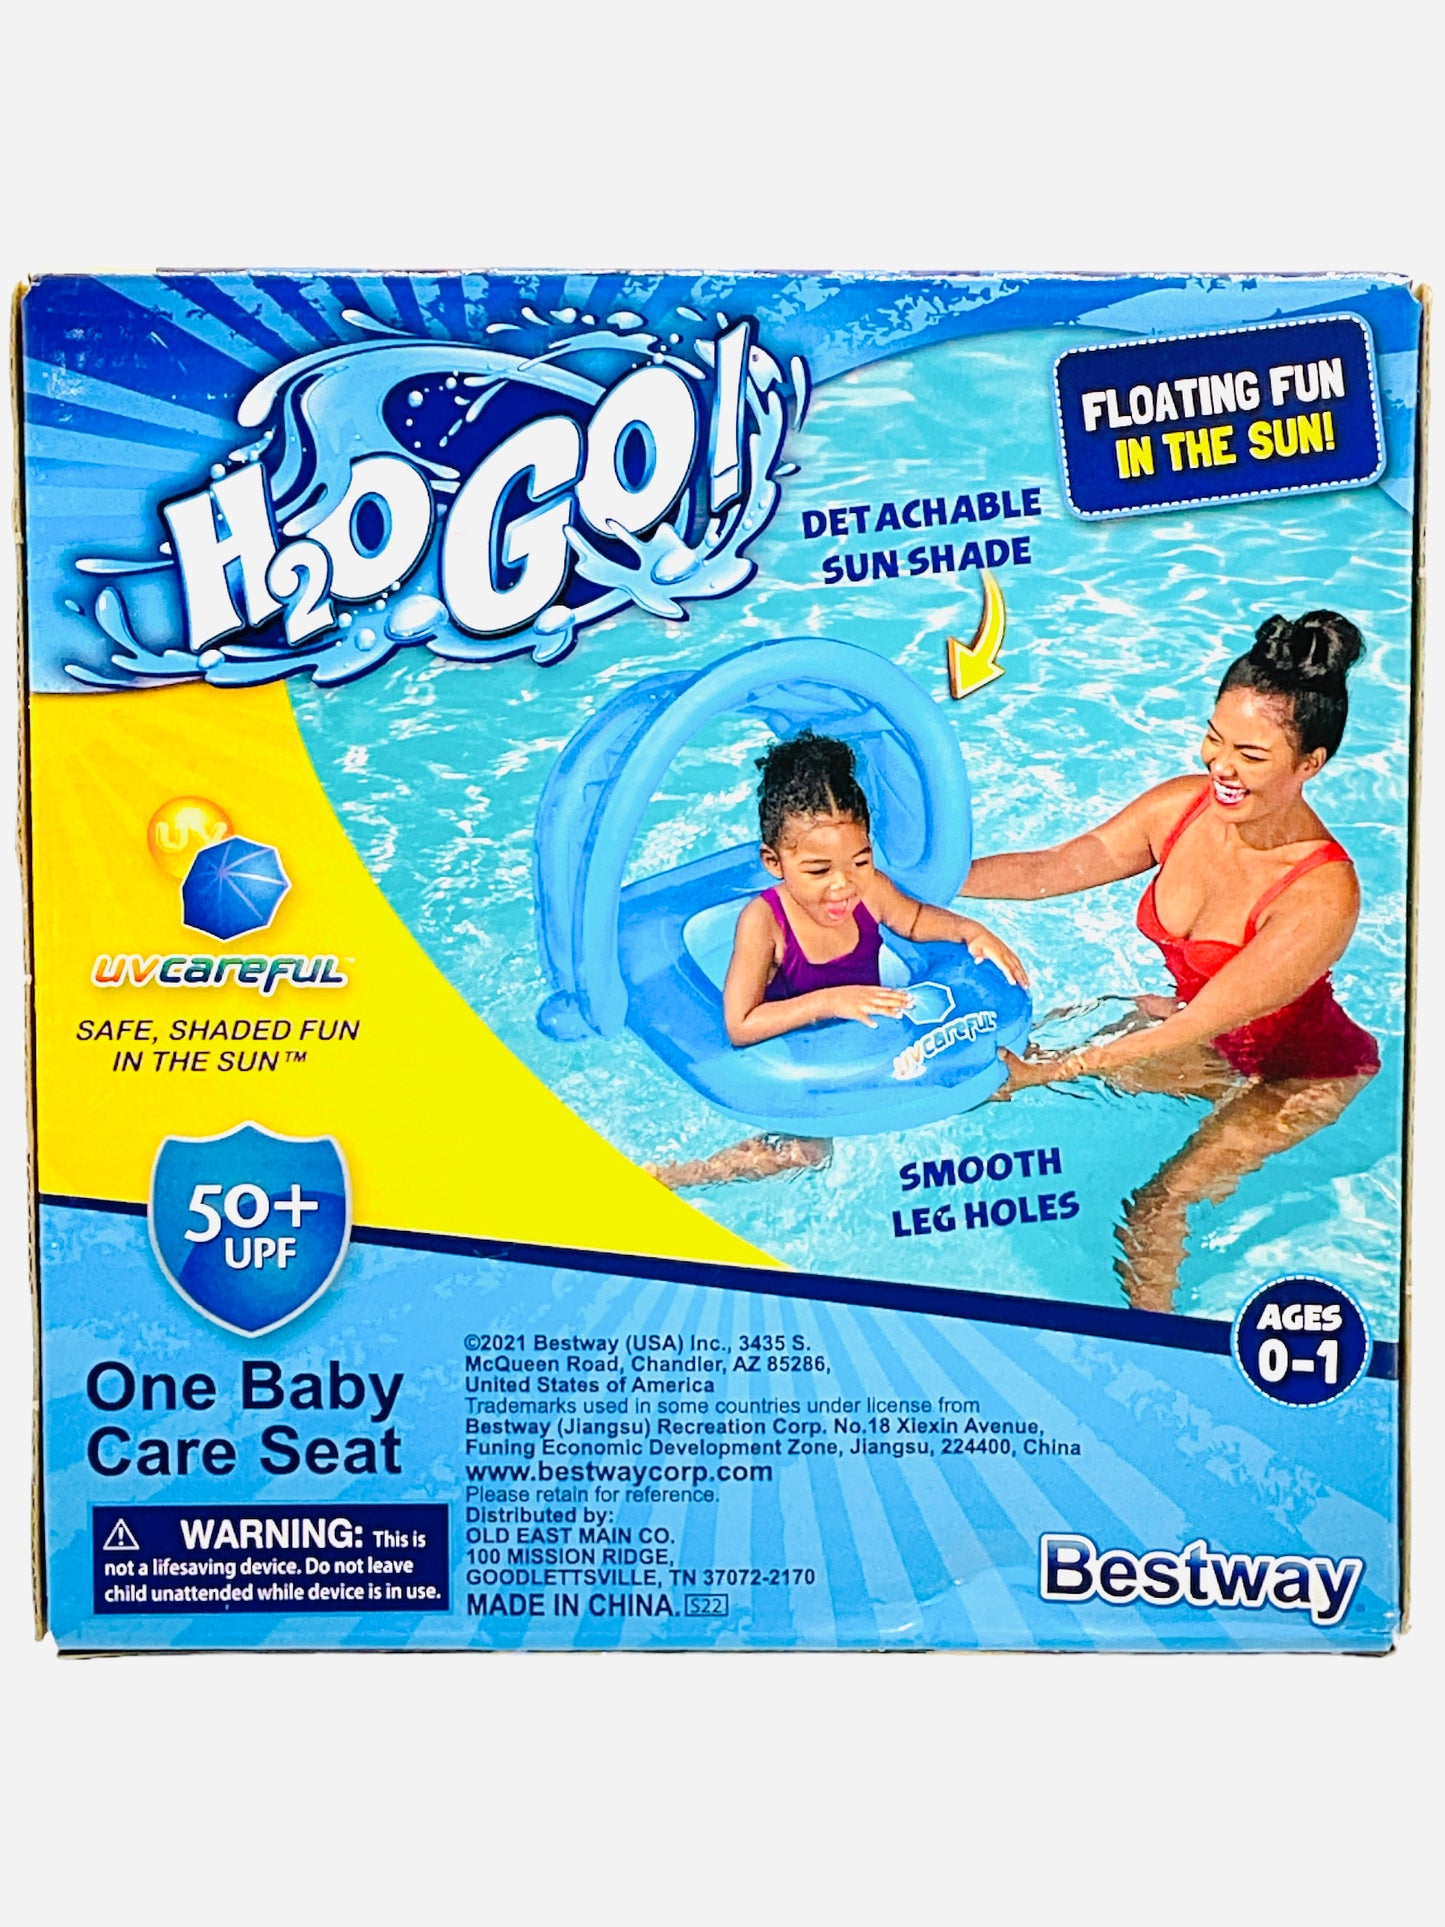 H2O Go Inflatable Baby Care Seat with Detachable Sun Shade (You Choose Color) (Ages 0-1)